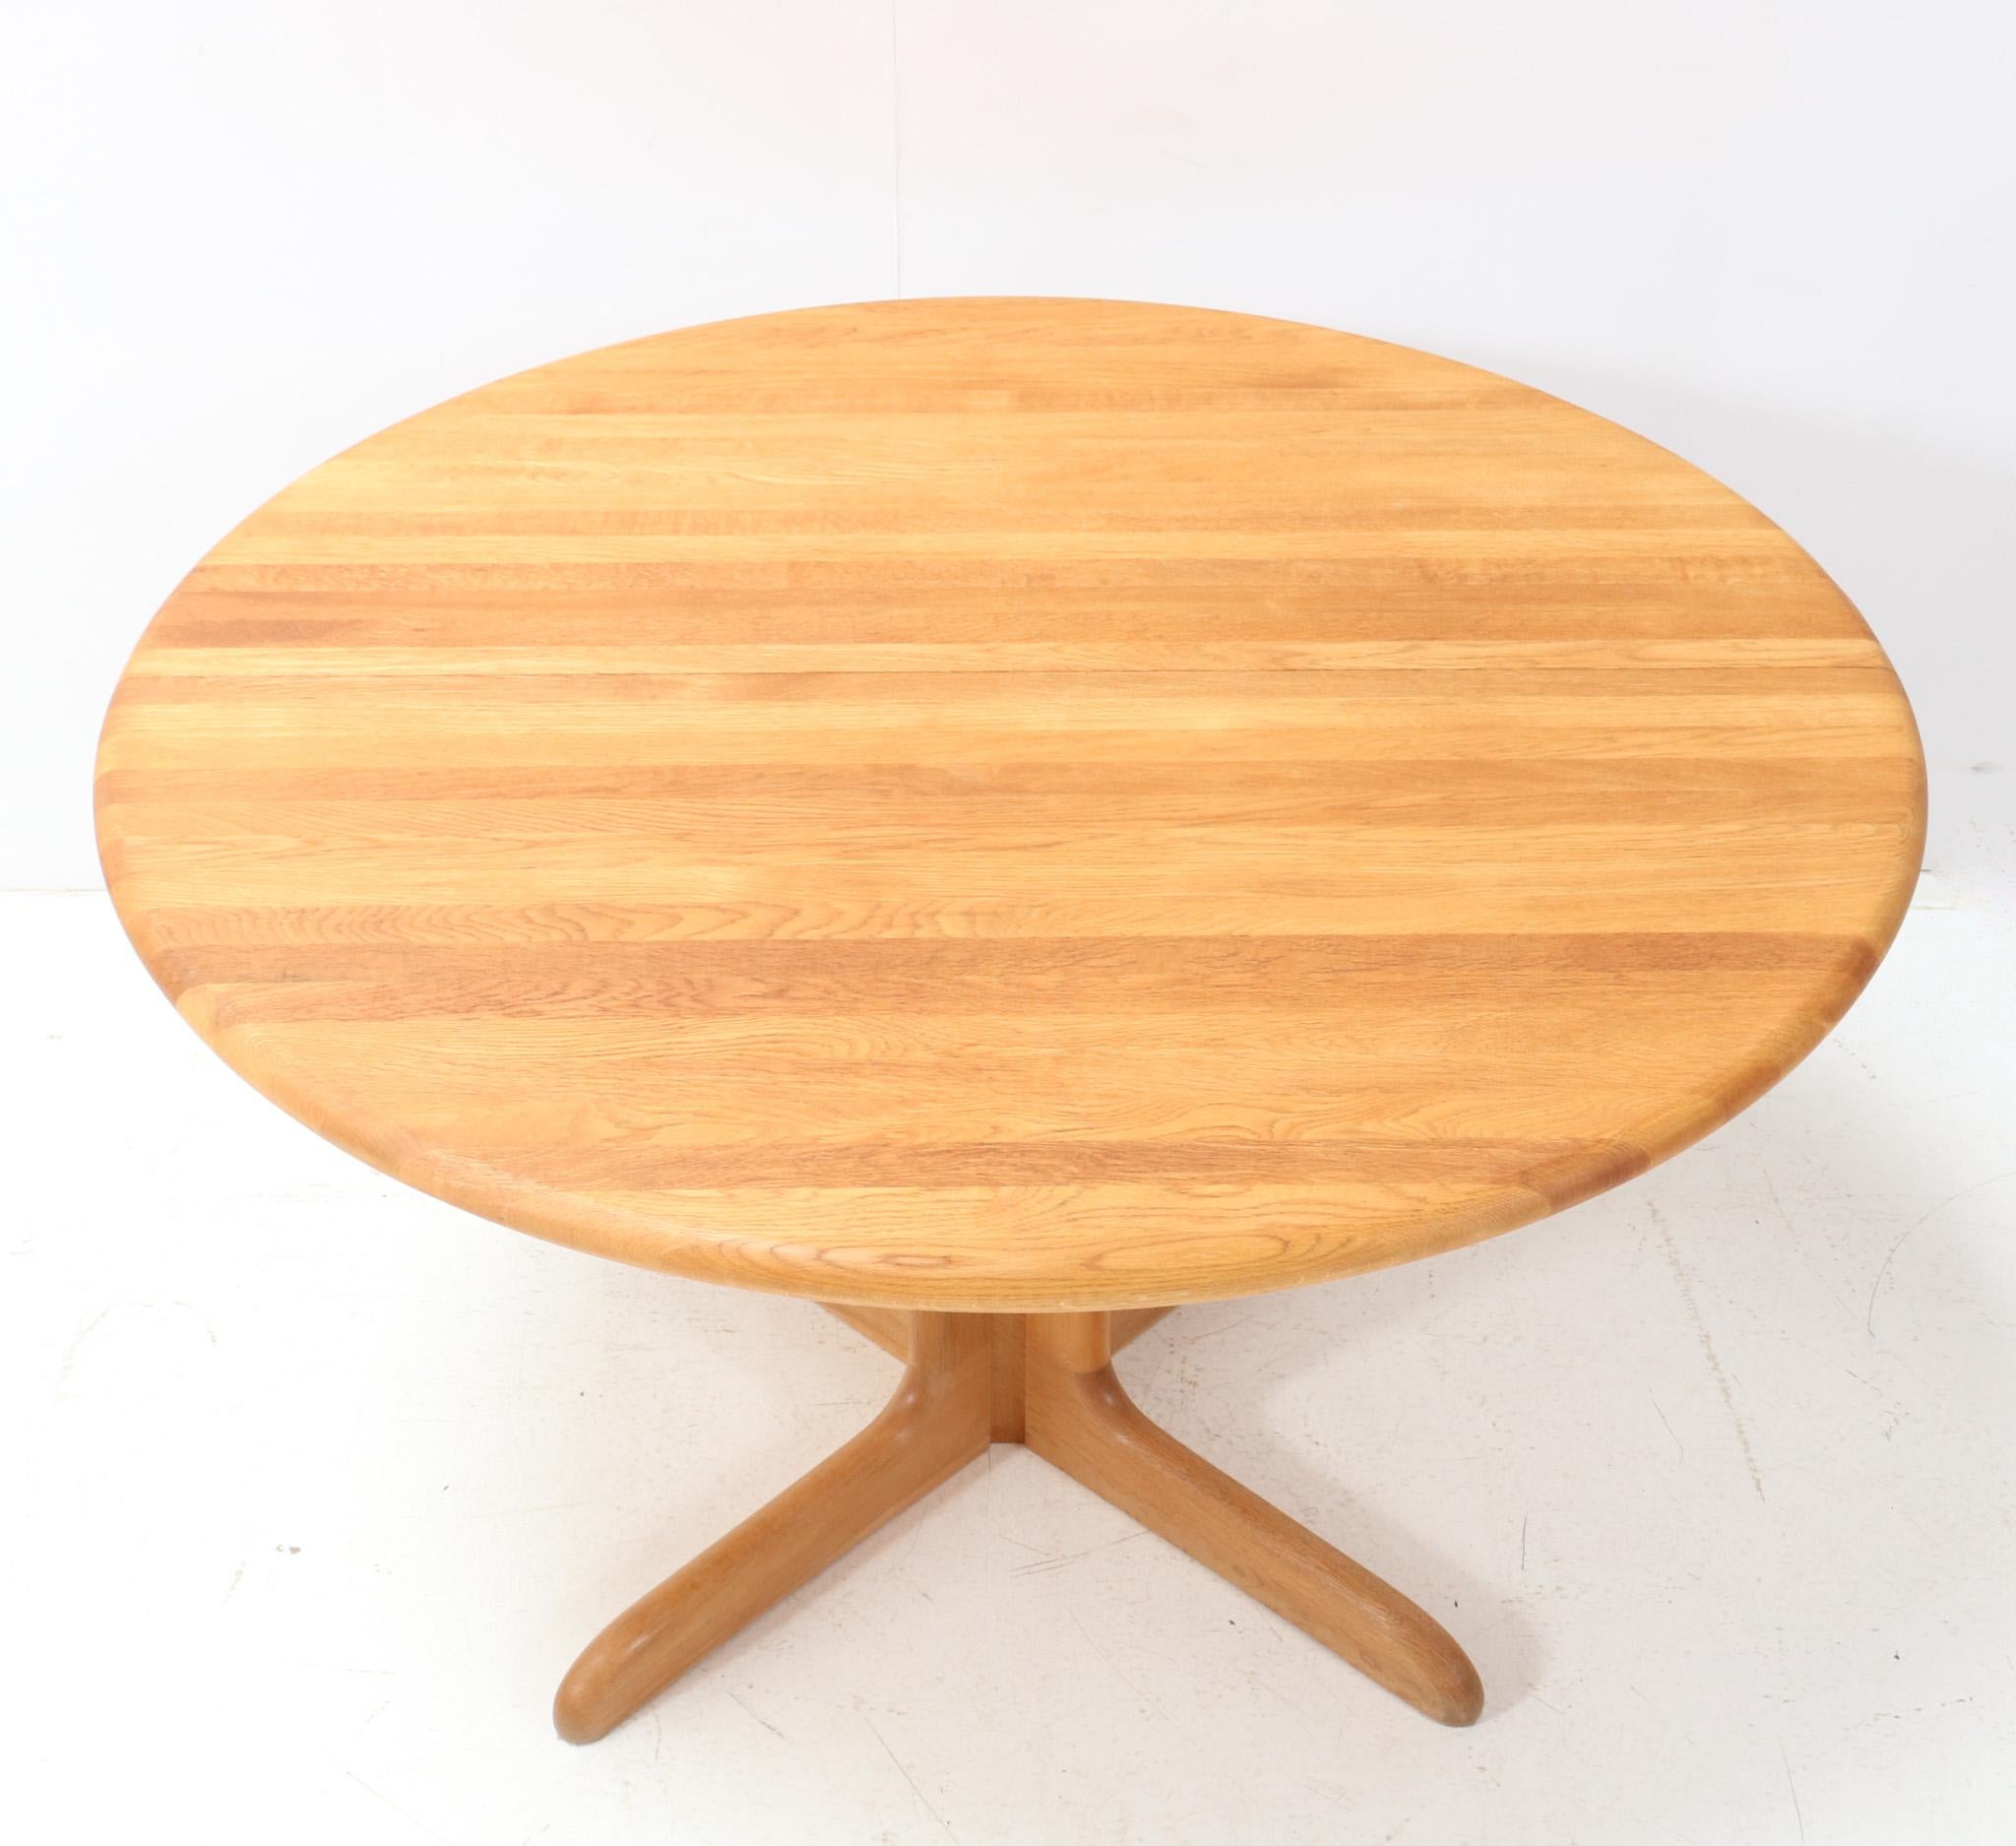  Mid-Century Modern Extendable Dining Room Table by Niels Otto Møller, 1970s For Sale 1